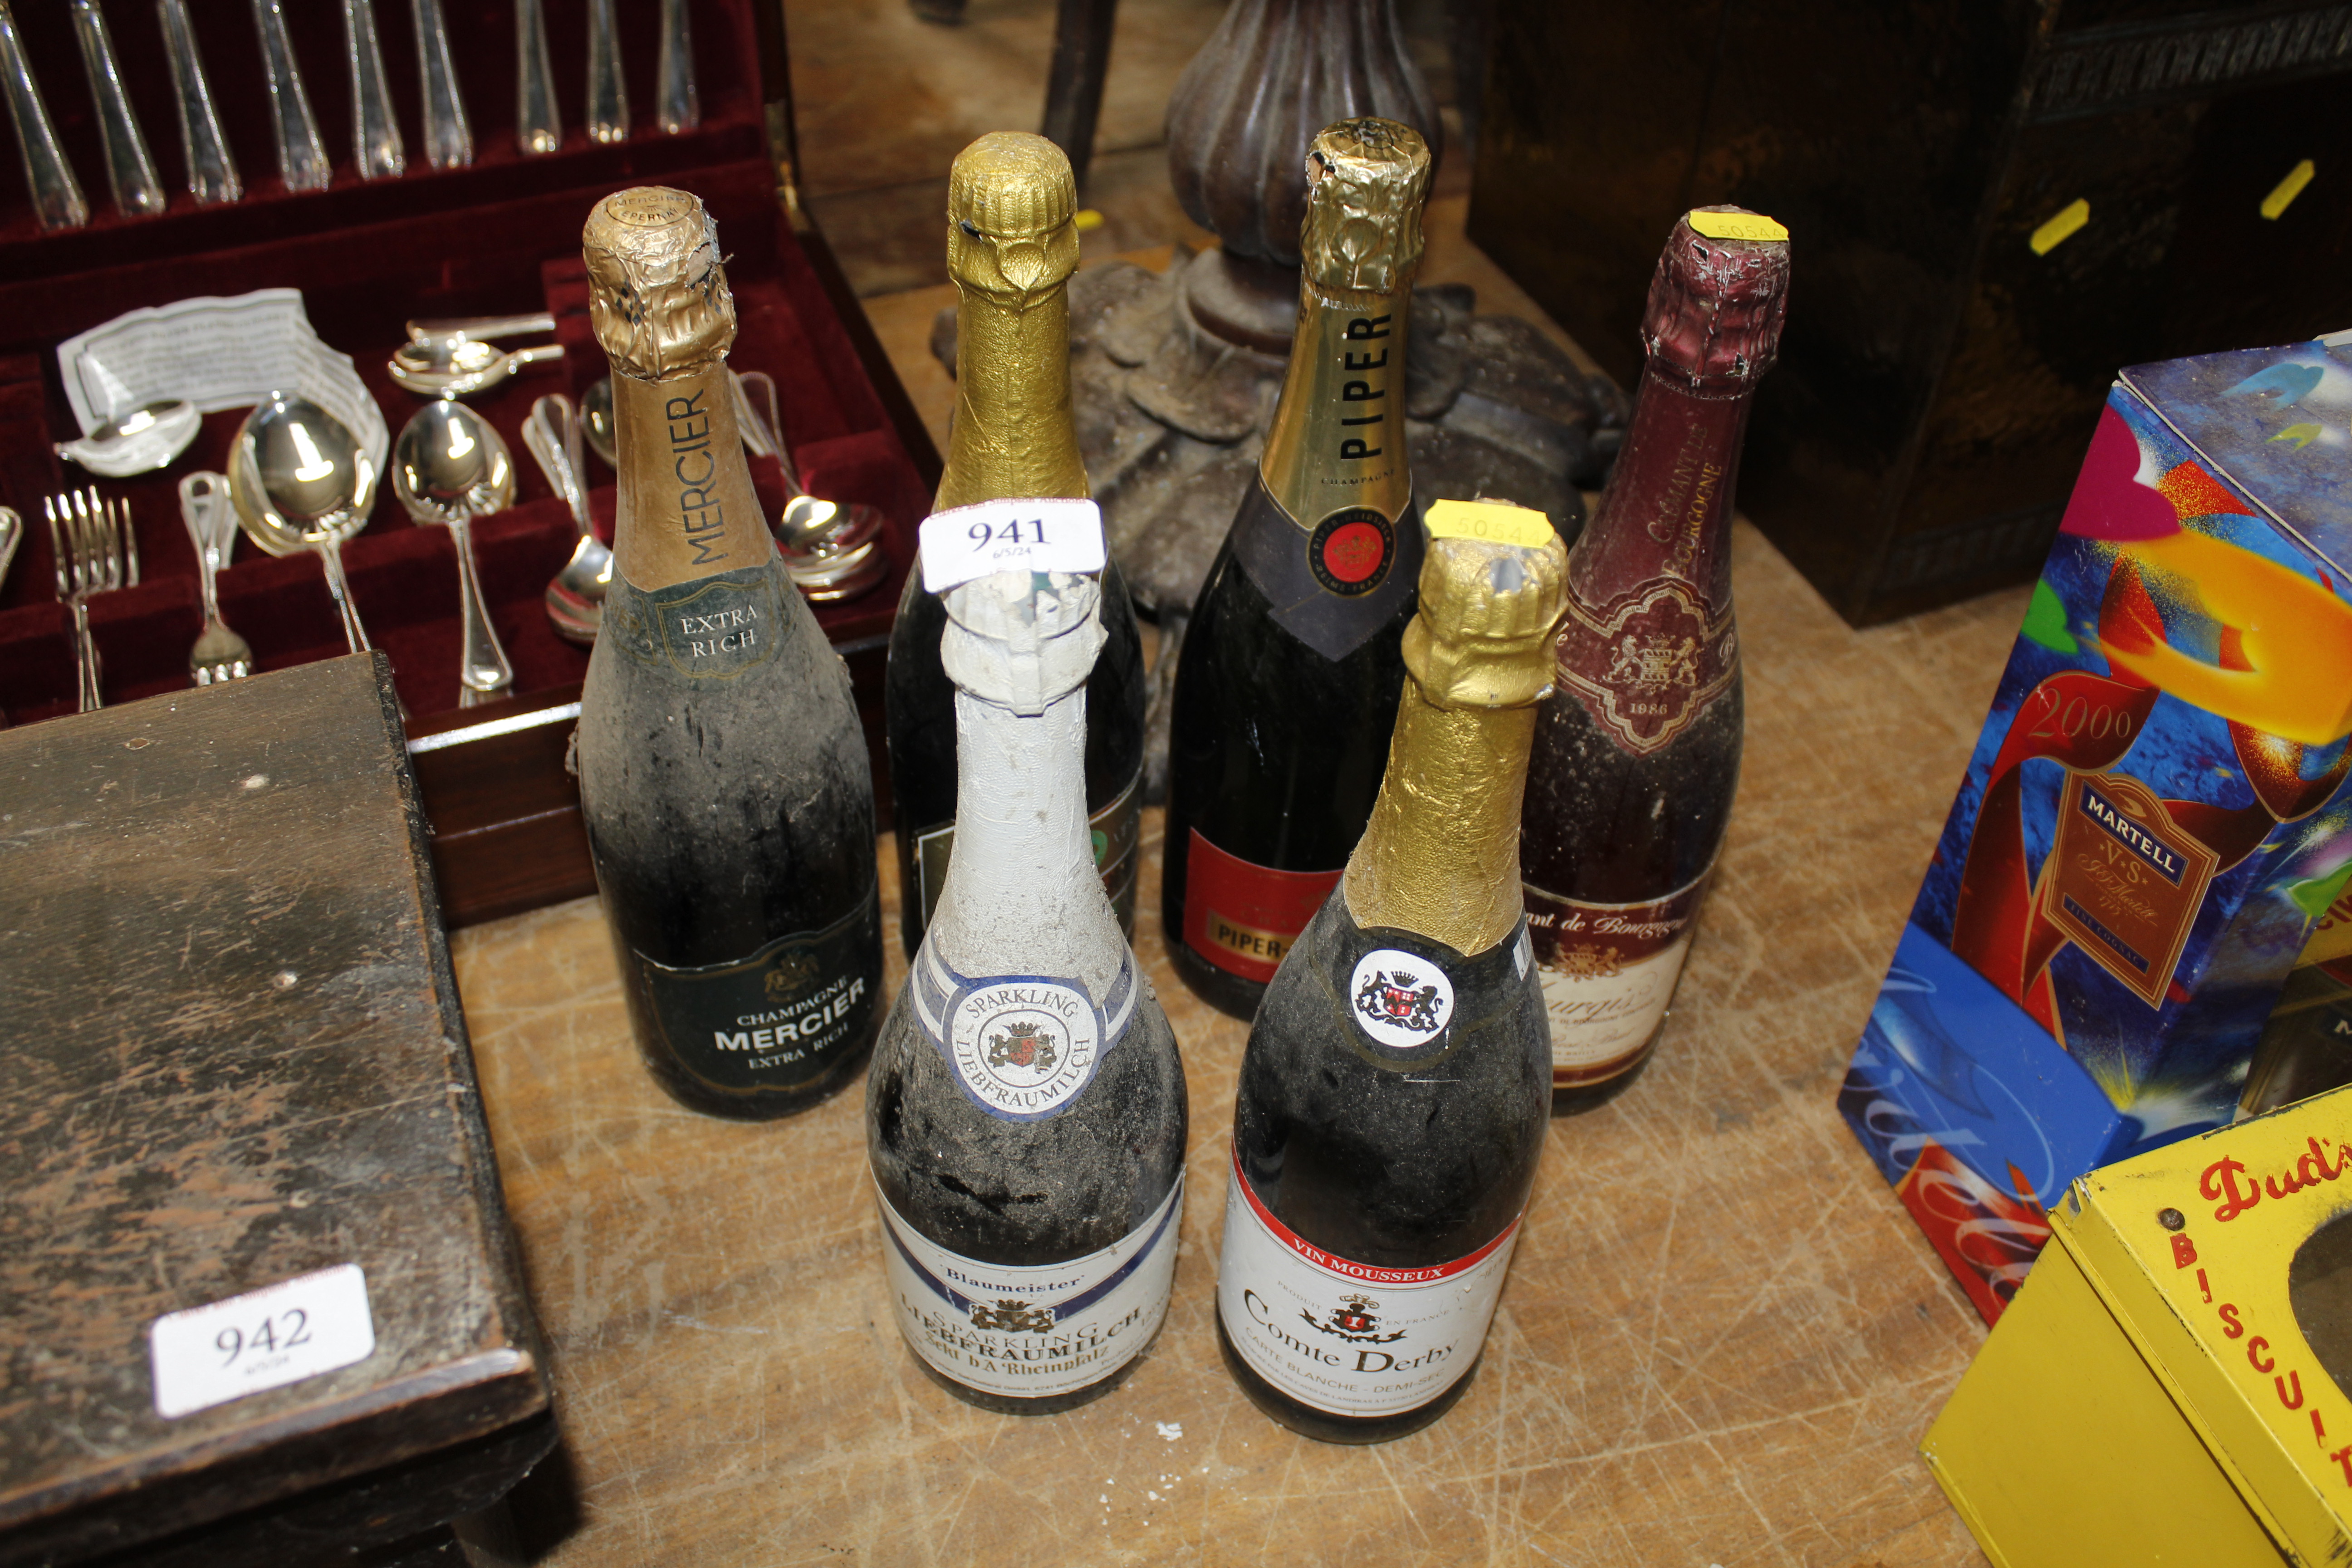 Six bottles of champagne and sparkling wine